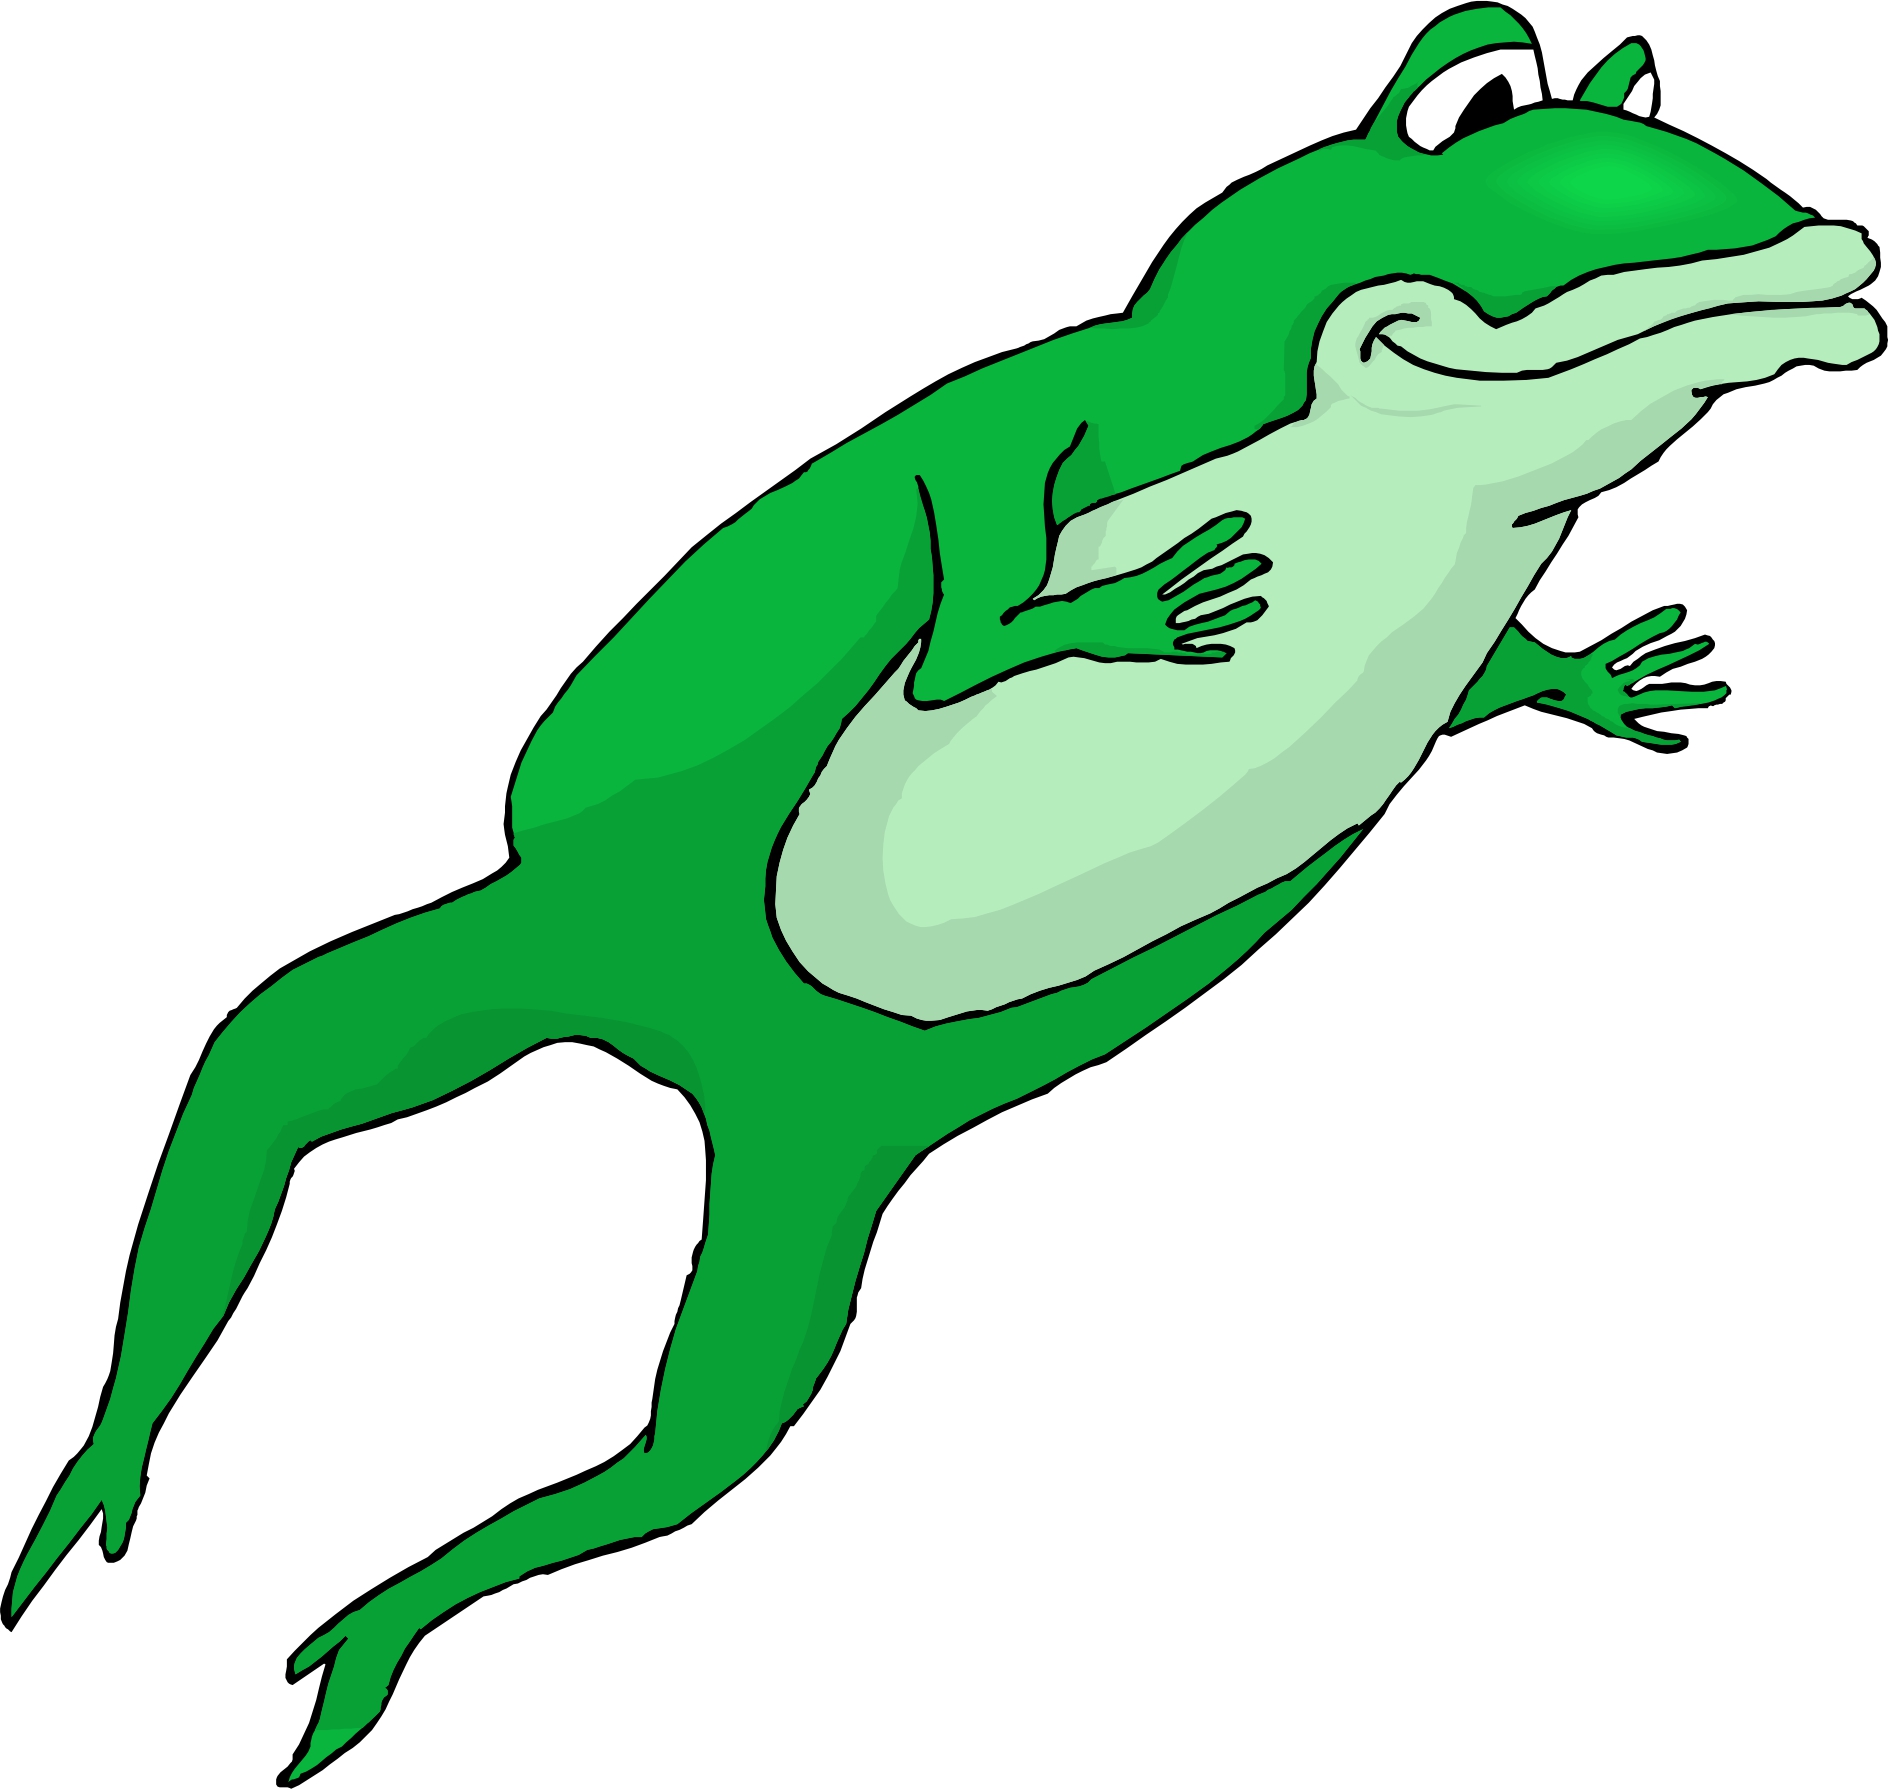 Jumping Frog Animation Images & Pictures - Becuo